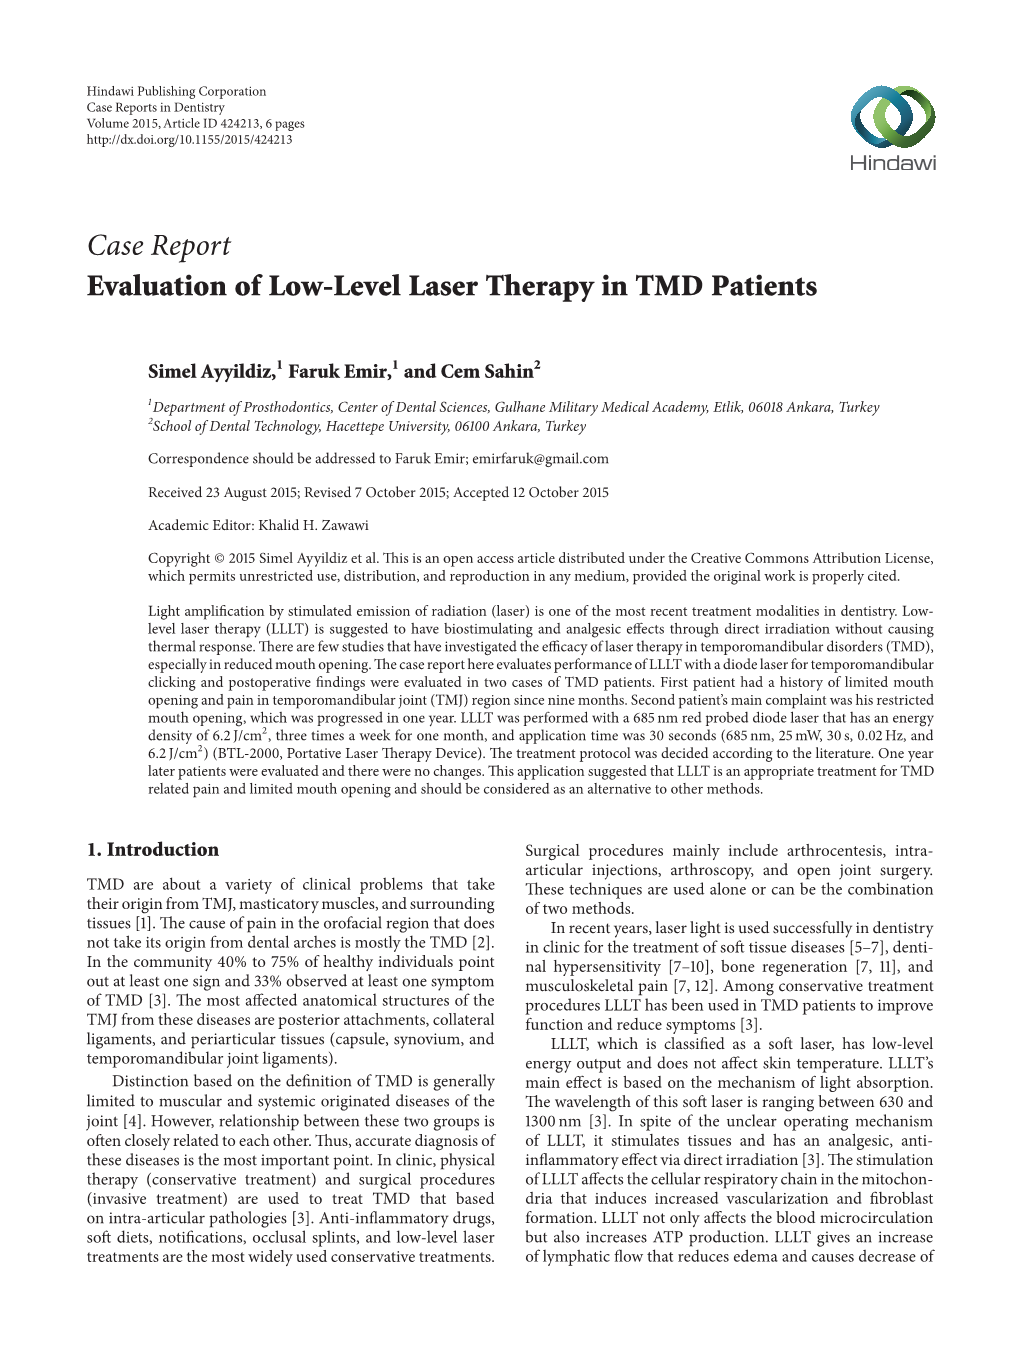 Case Report Evaluation of Low-Level Laser Therapy in TMD Patients